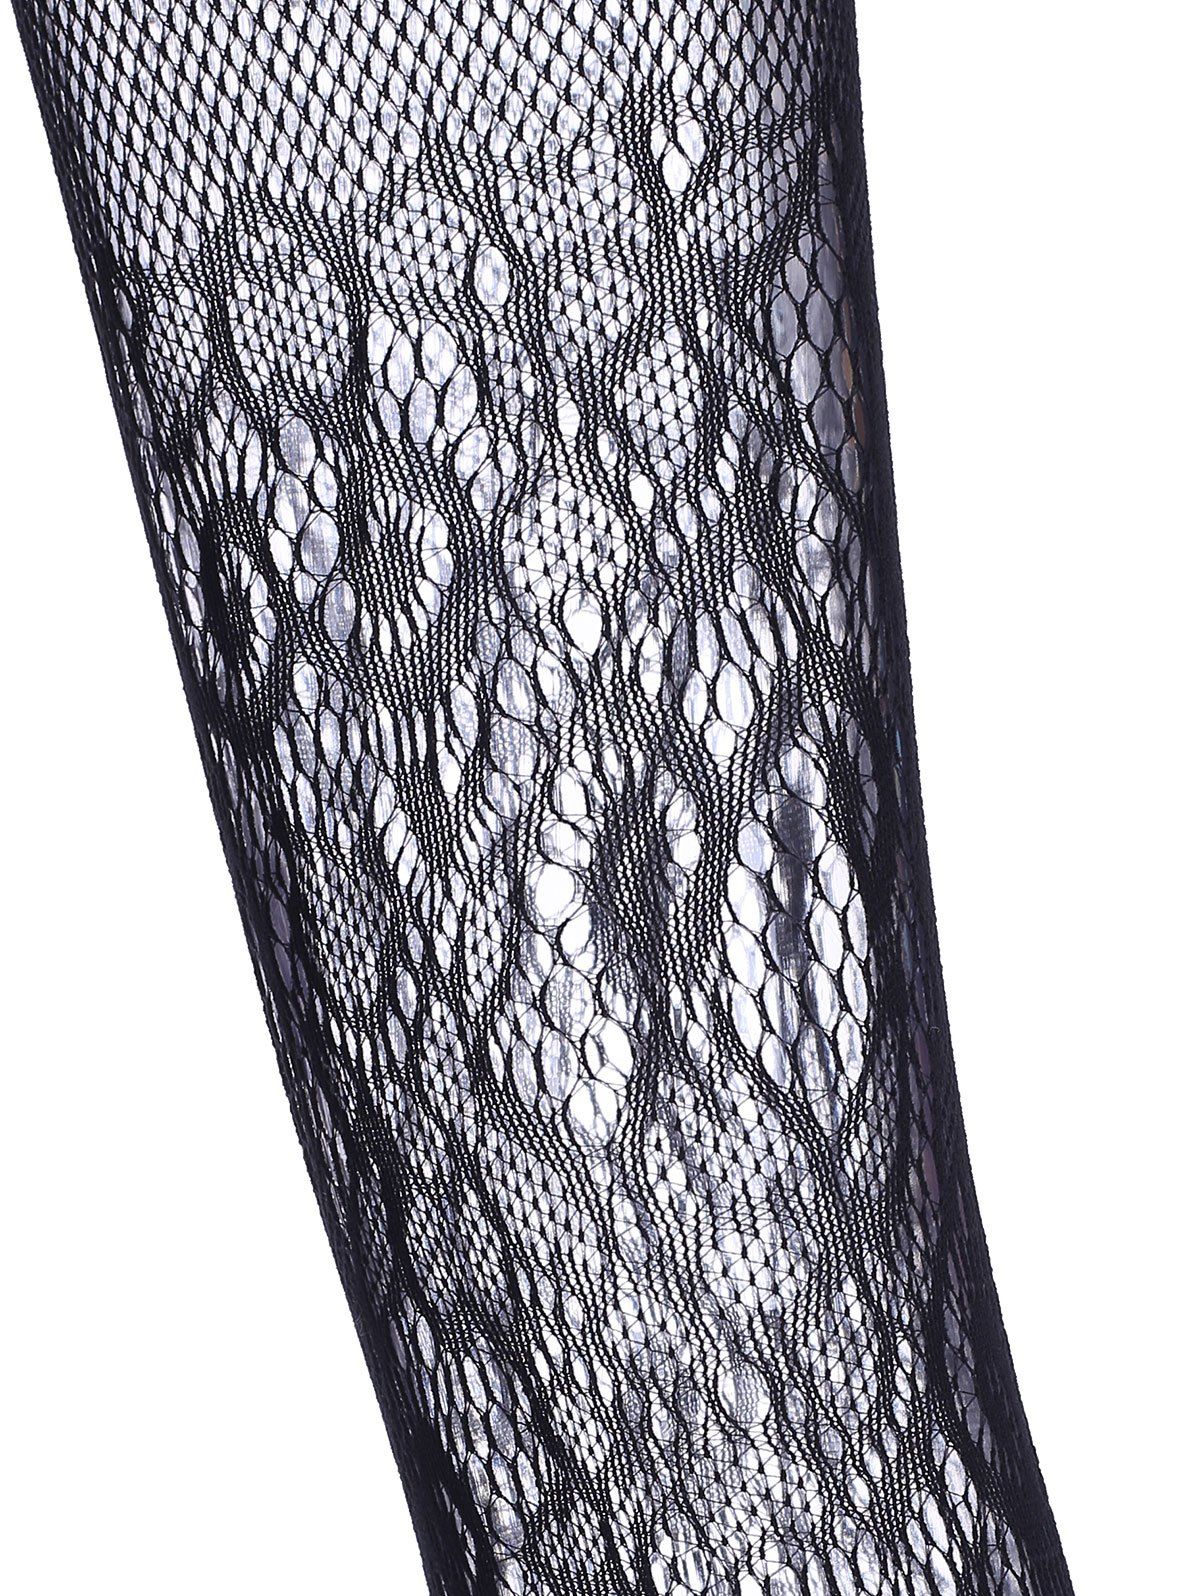 [24% OFF] 2020 Plus Size See Thru Lace Fishnet Bodystockings In BLACK ...